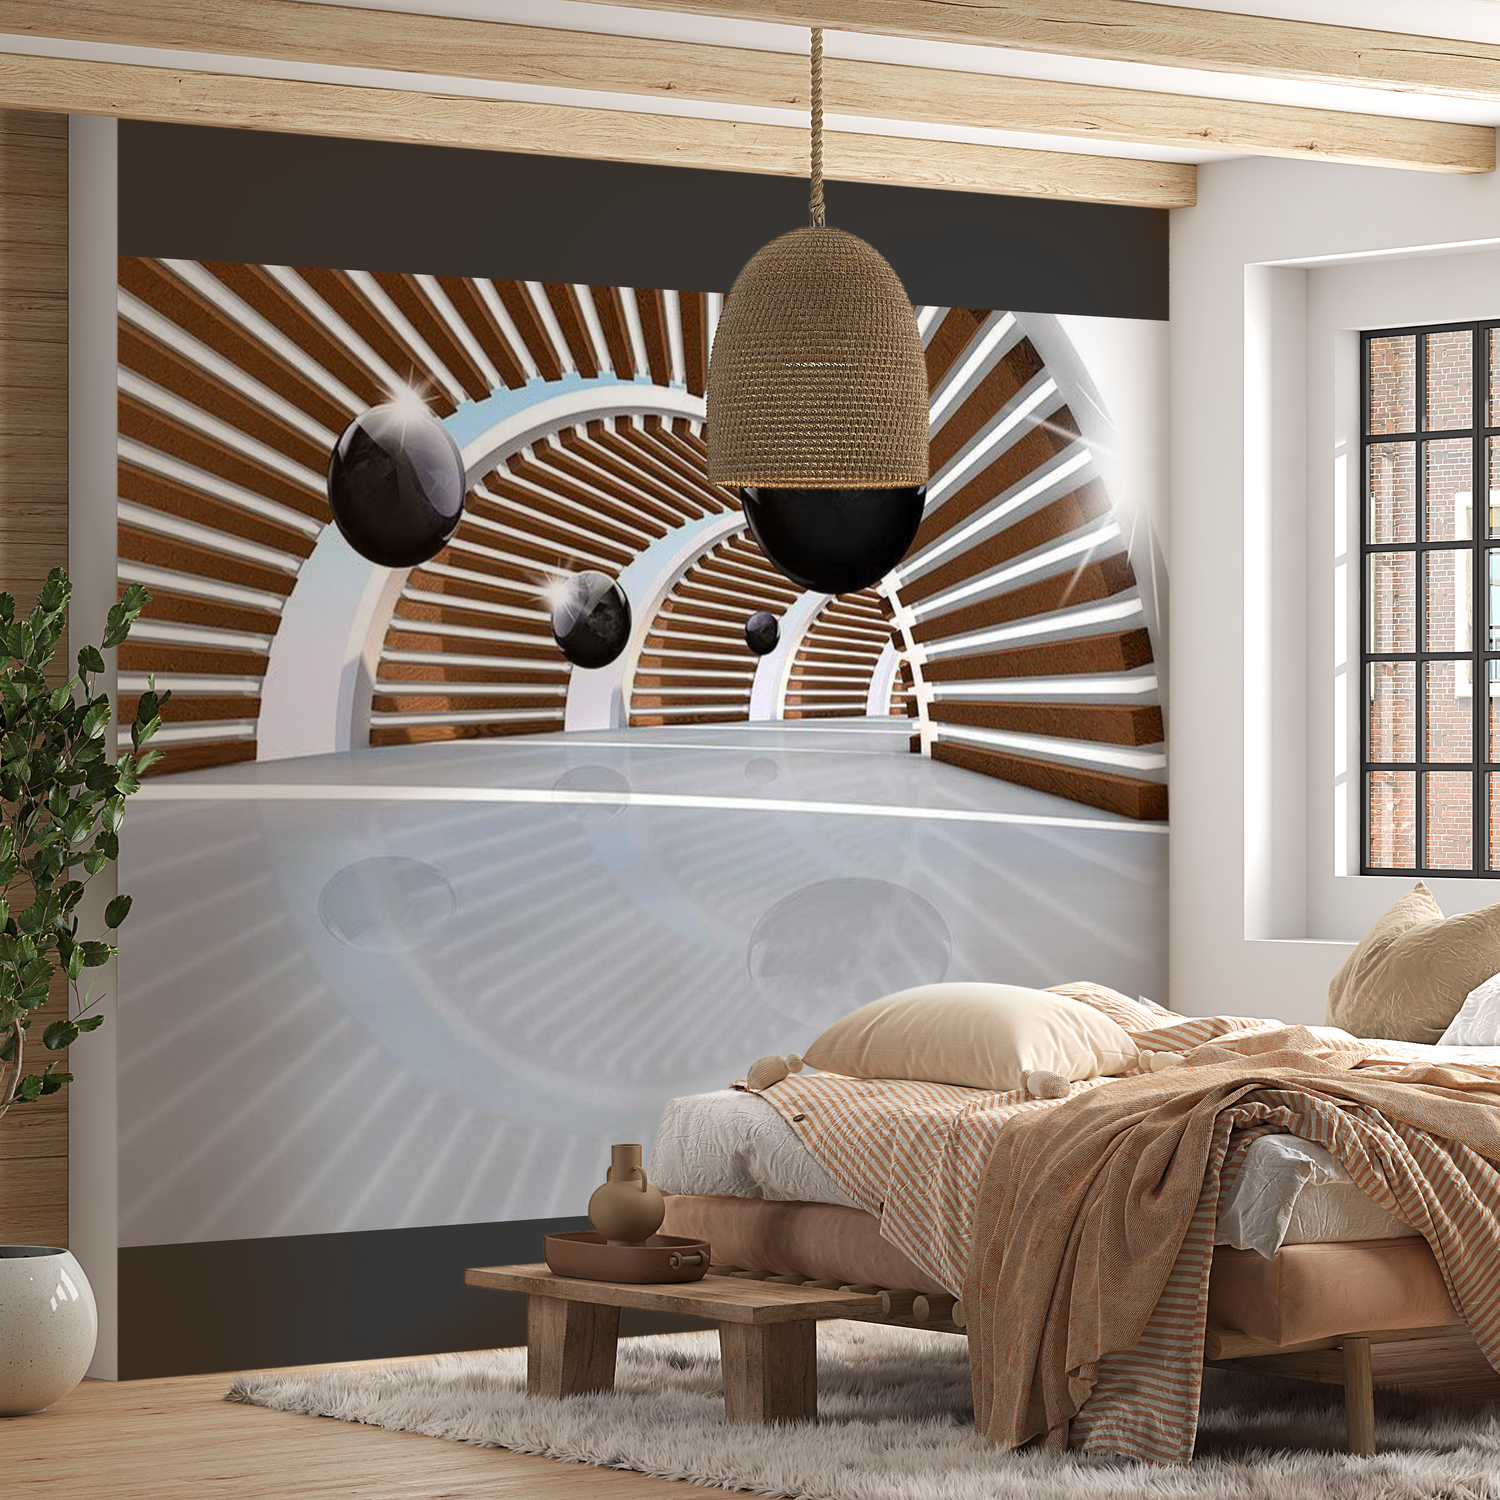 3D Illusion Wallpaper Wall Mural - Sky Tunnel 39"Wx27"H